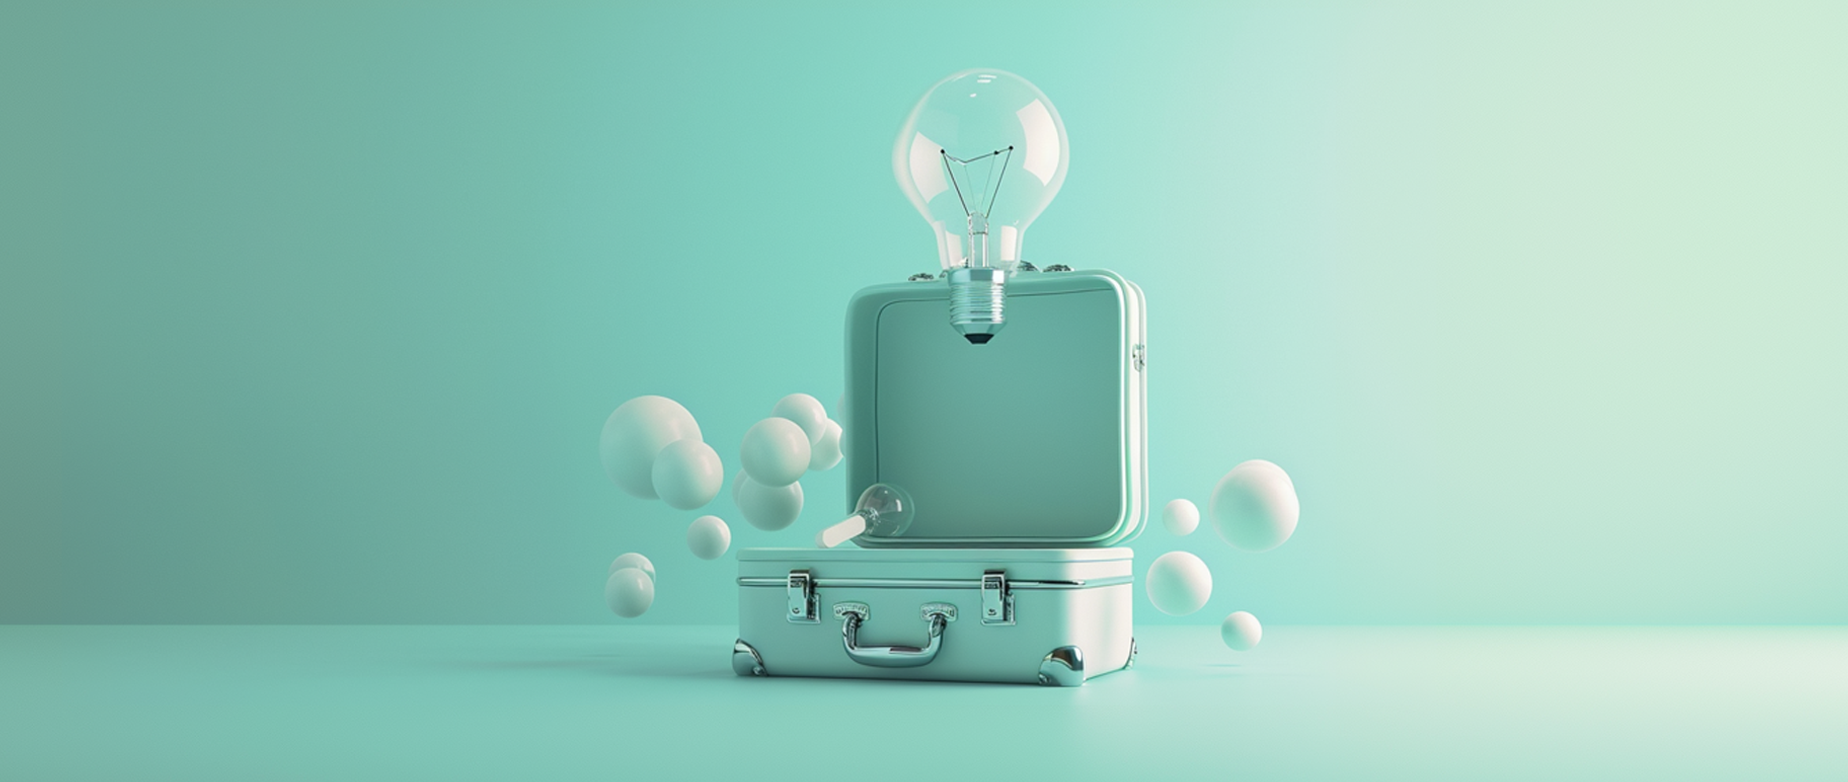 An open suitcase with a lightbulb and white spheres surround it on an aqua background.